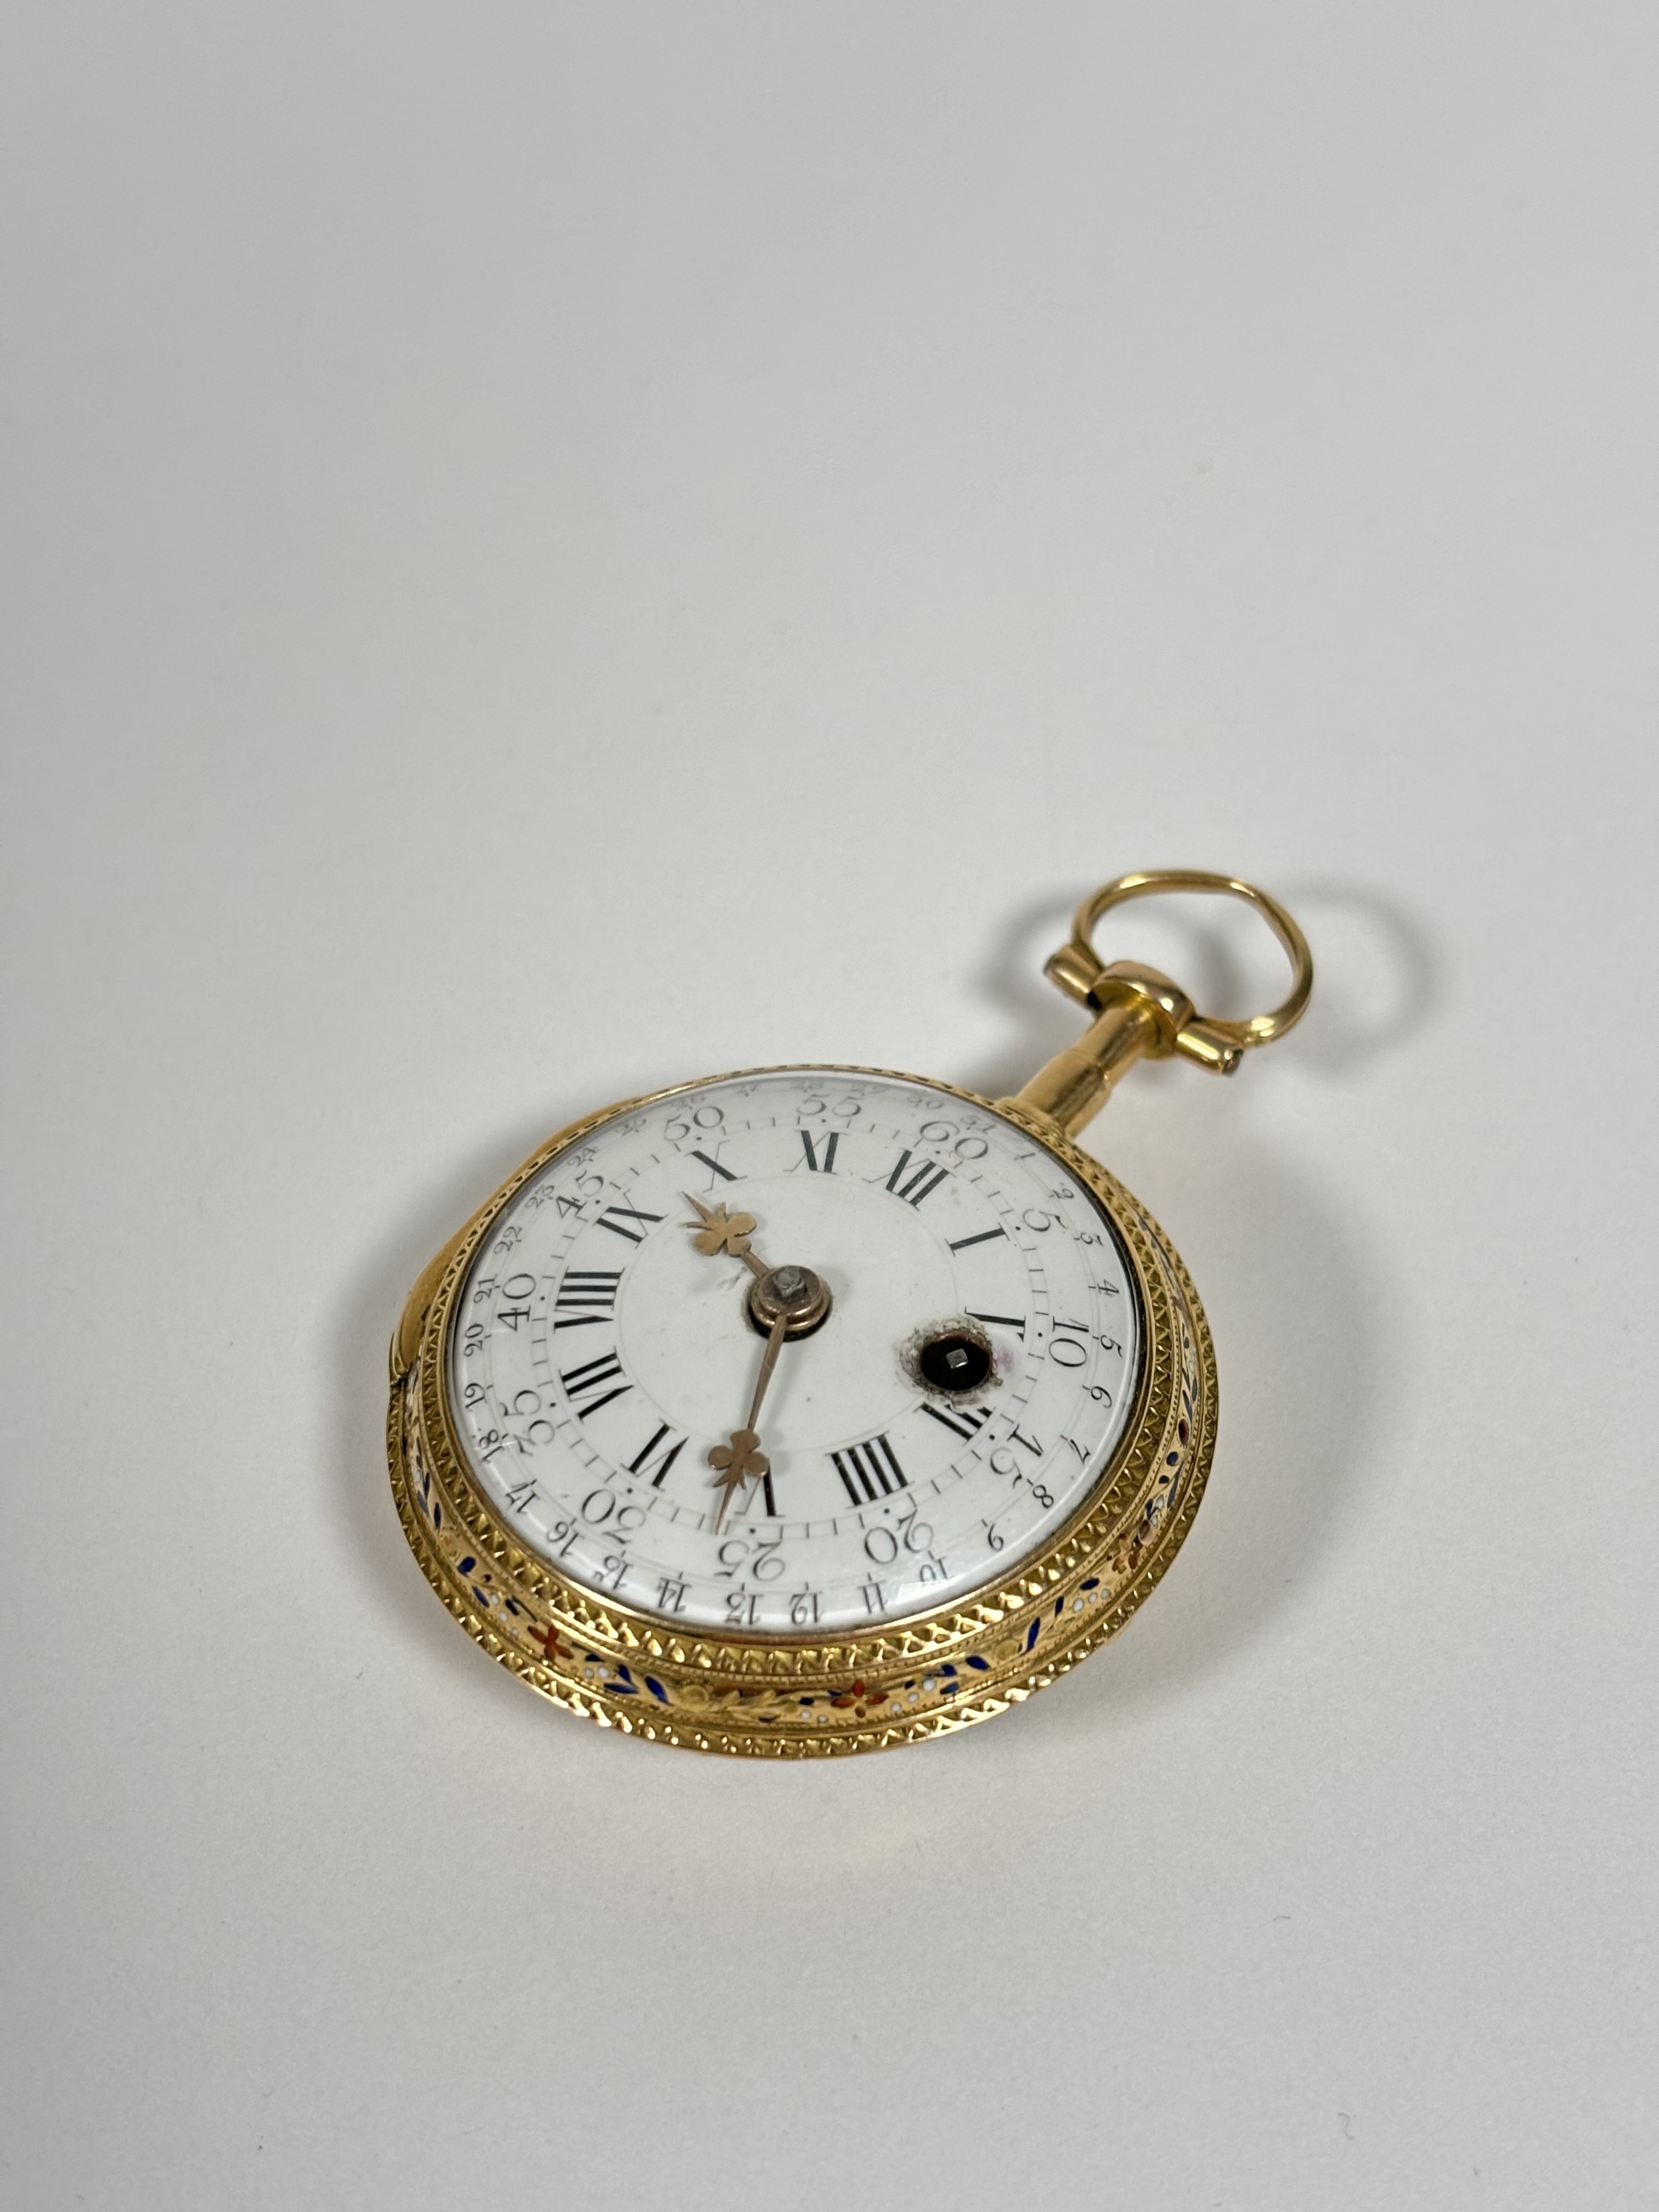 A diamond-set gold (unmarked) pair-cased pocket watch, late 18th century - Image 2 of 4